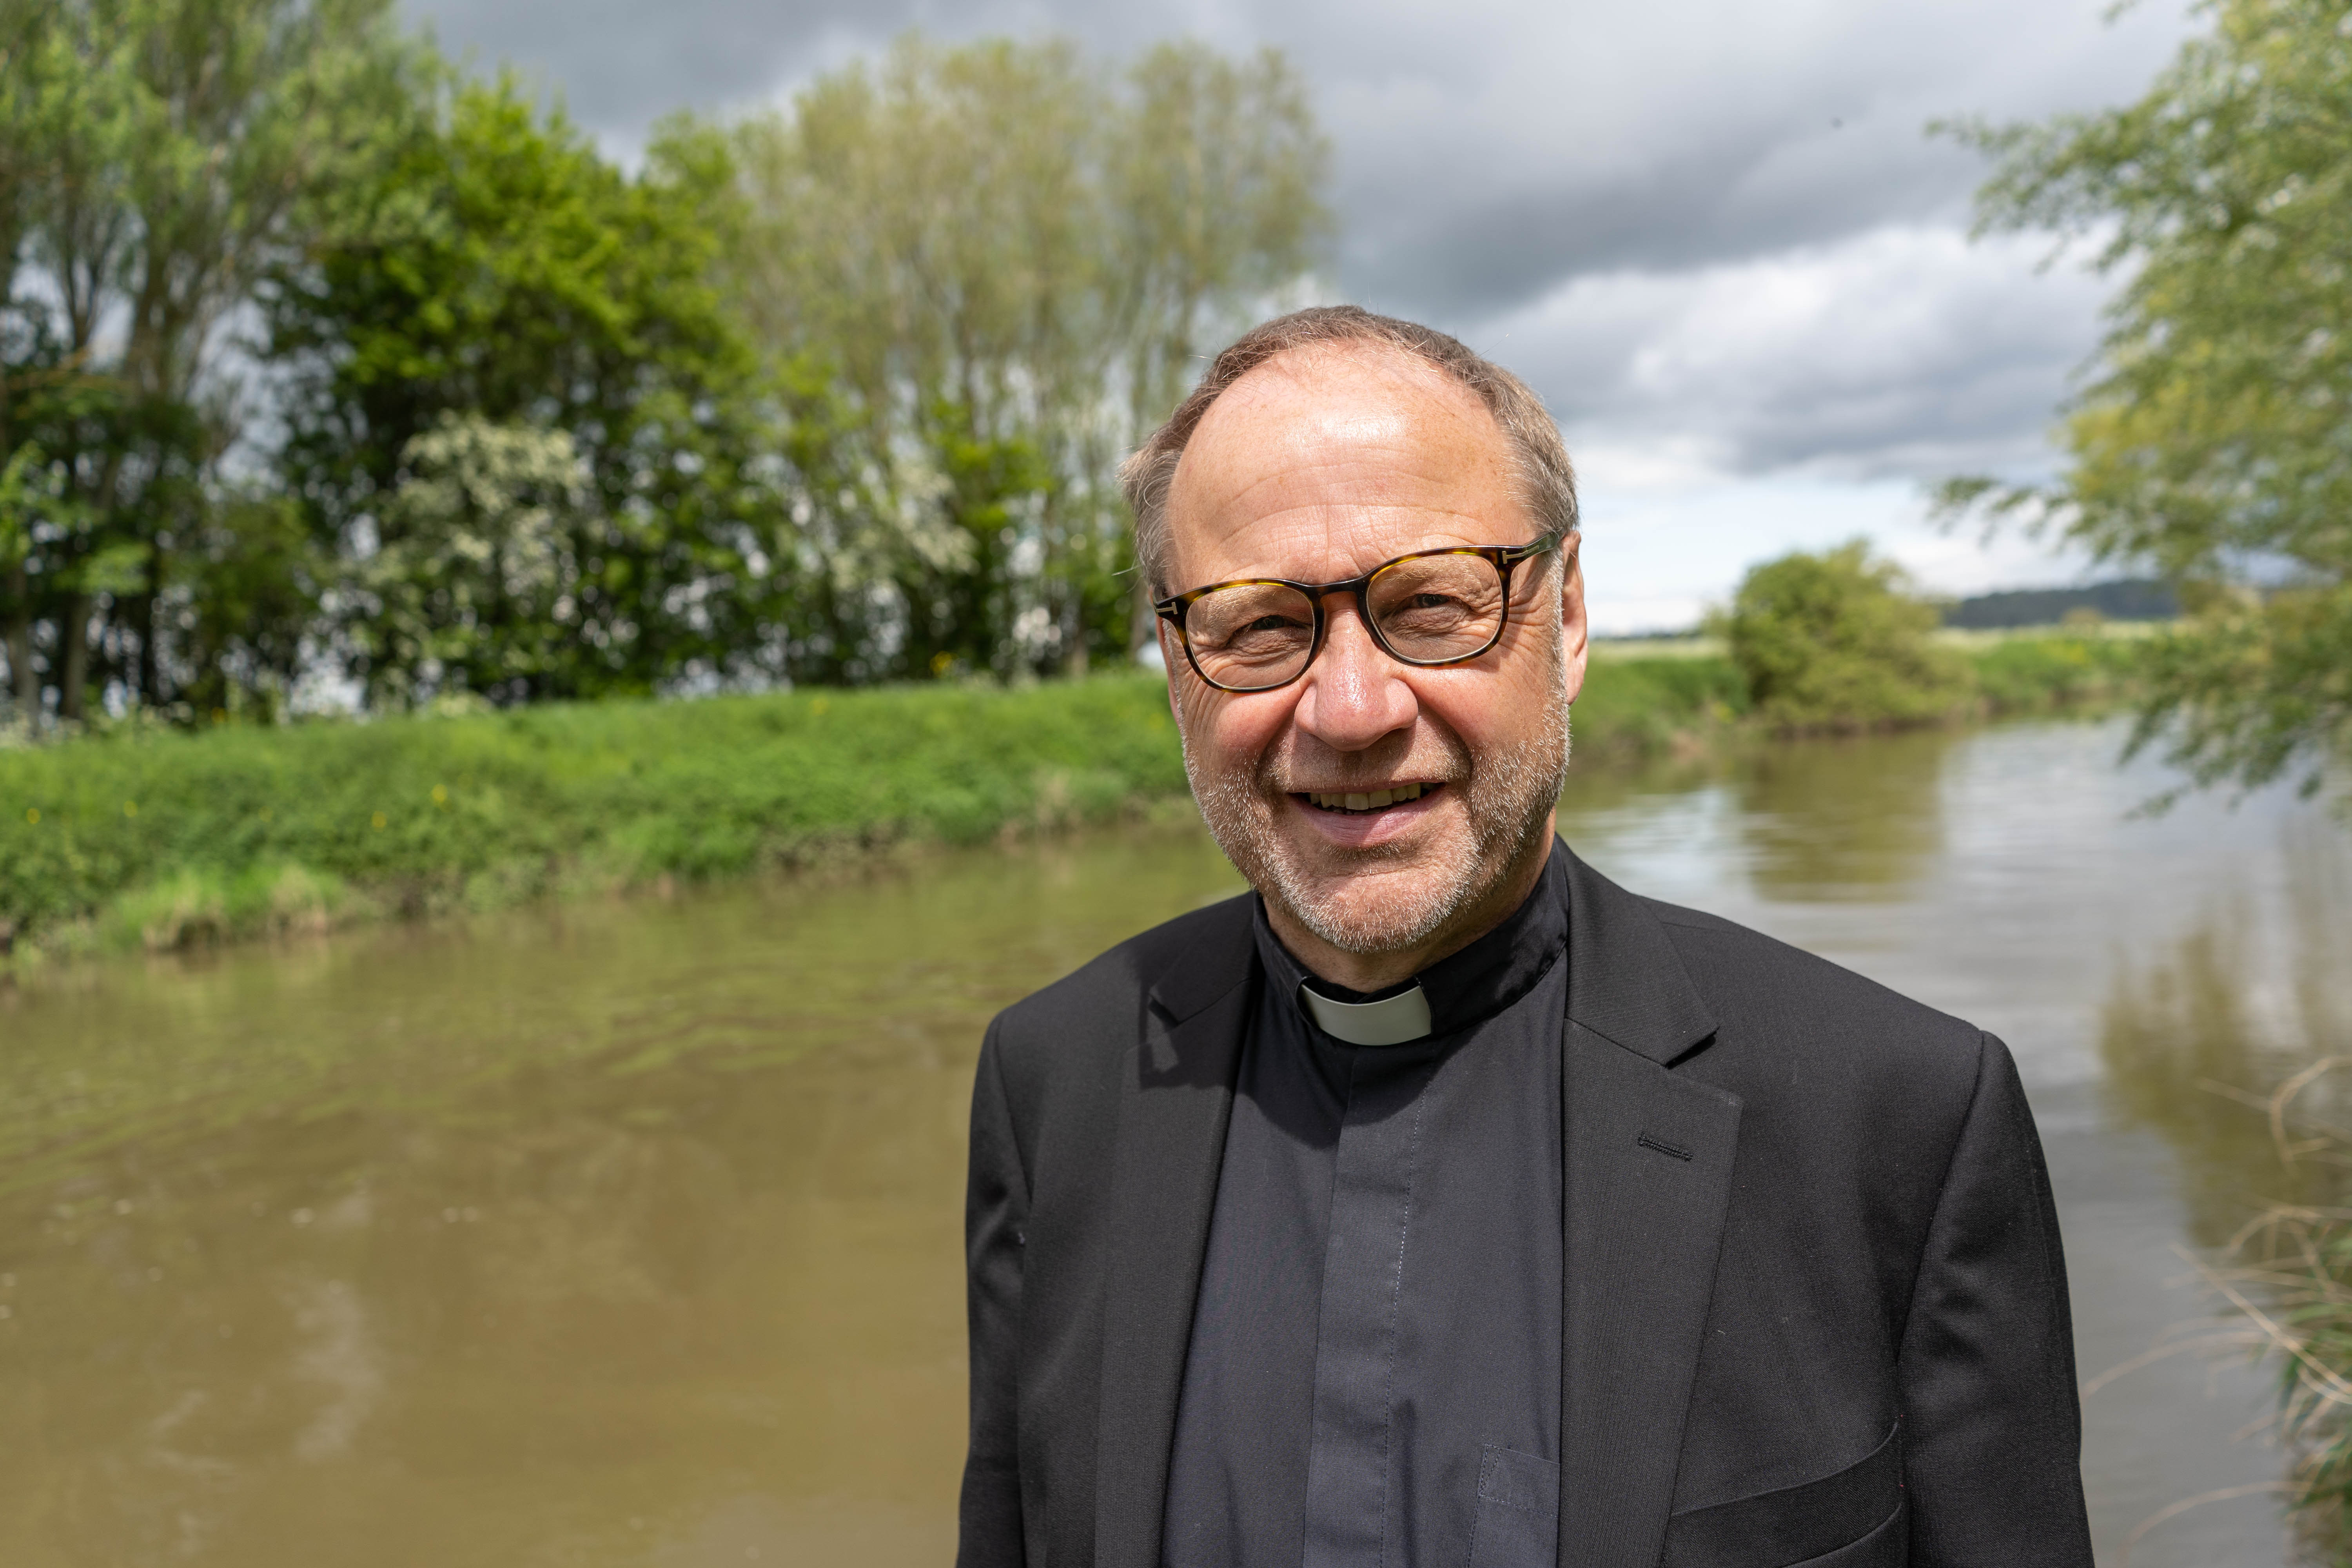 Archdeacon Robert in front of the river Avon